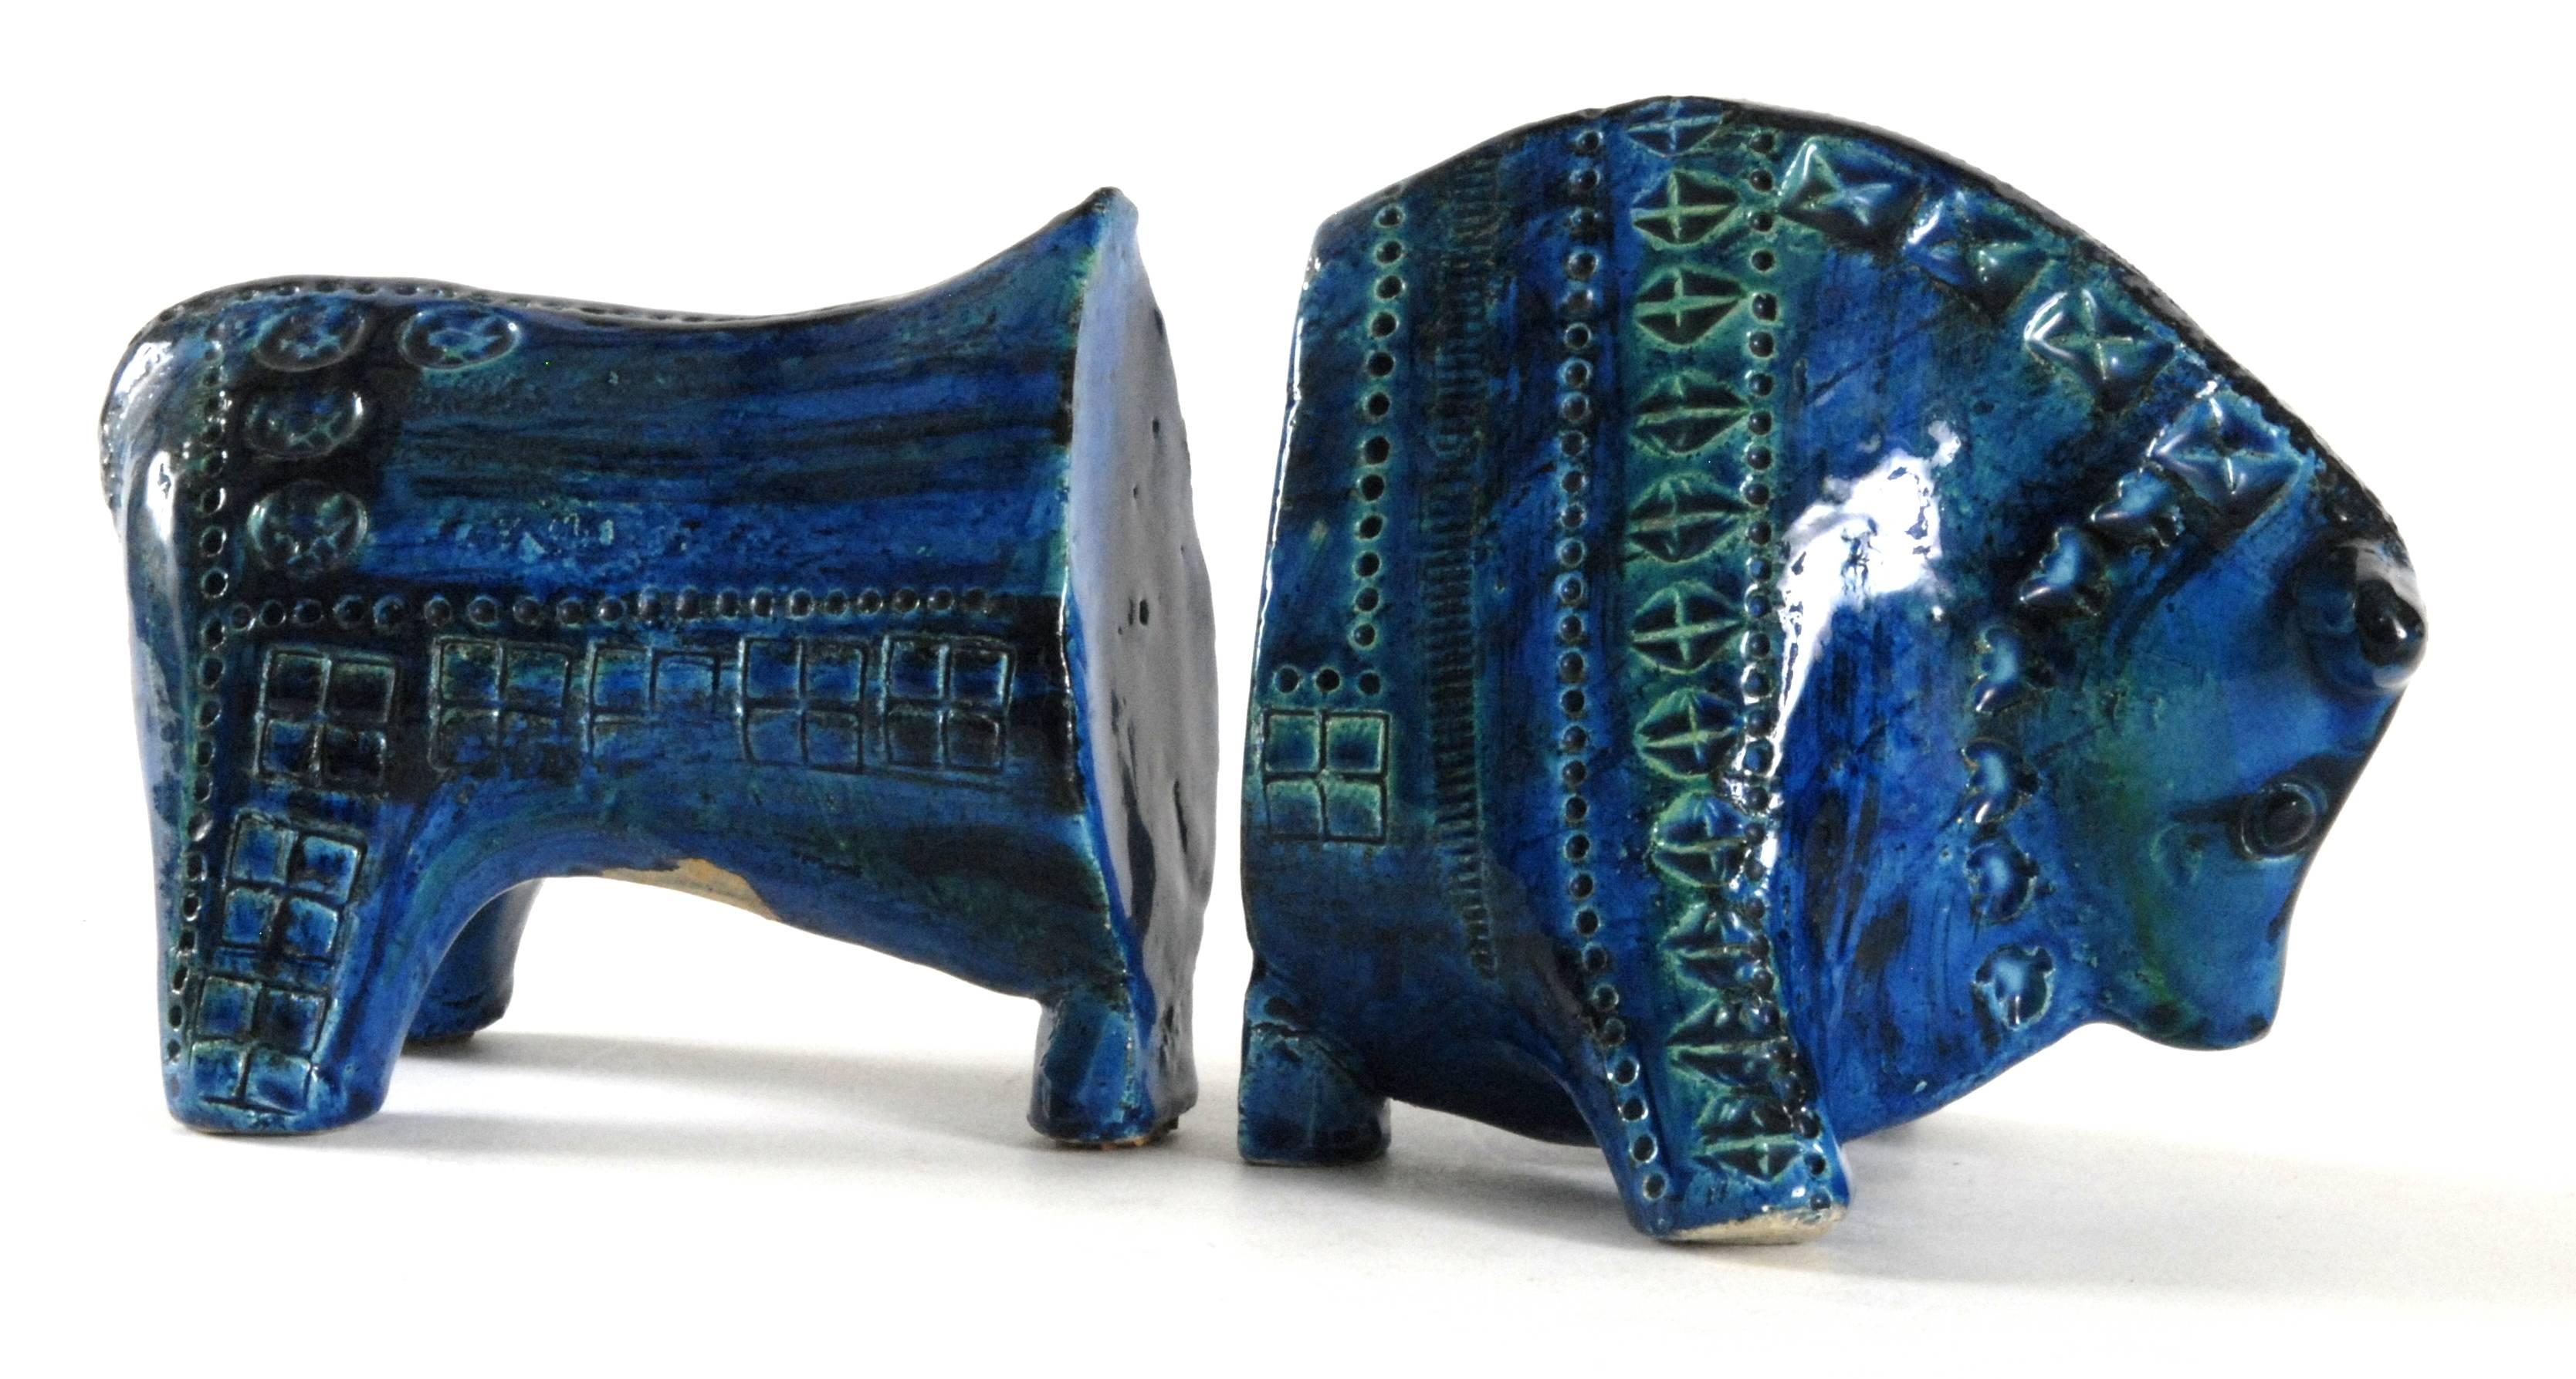 Stylised 'Rimini Blu' pattern bull book-ends, powerful, impressive and different.
In excellent condition and marked underneath.